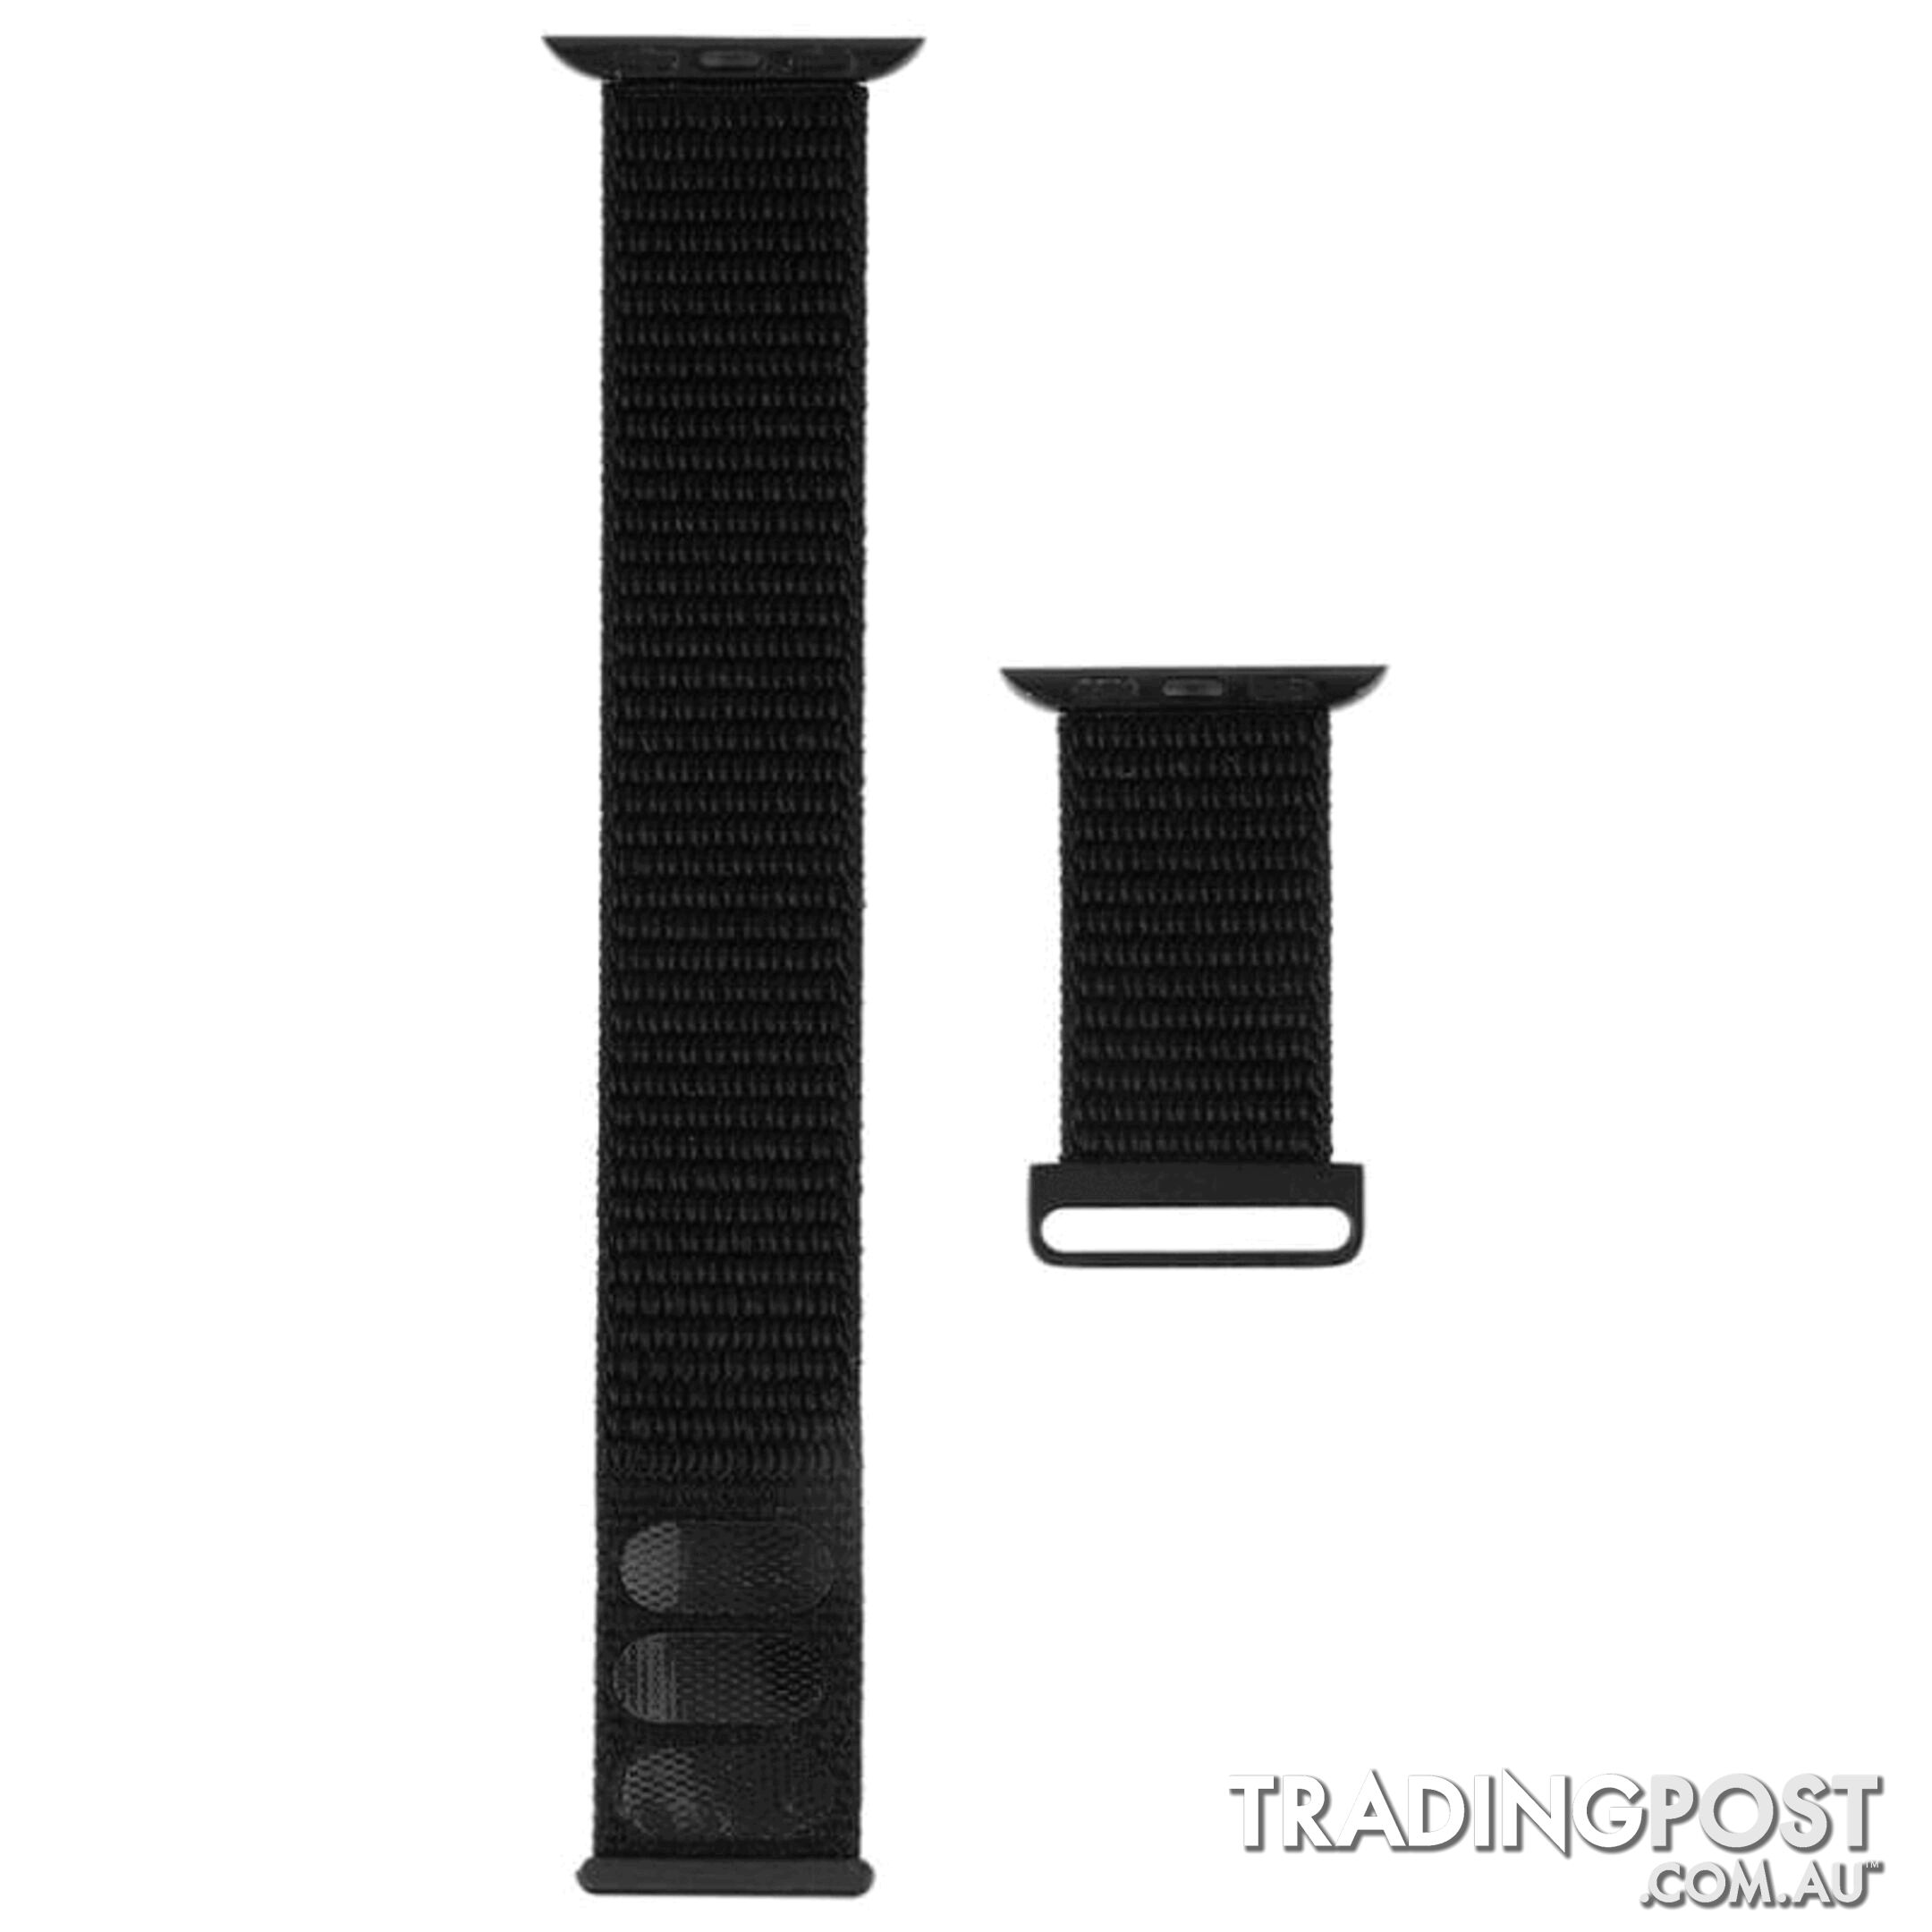 Case-Mate Nylon Watch Band For Apple Watch Series 1-5/38-40mm - Case-Mate - Nylon Black - 846127190442